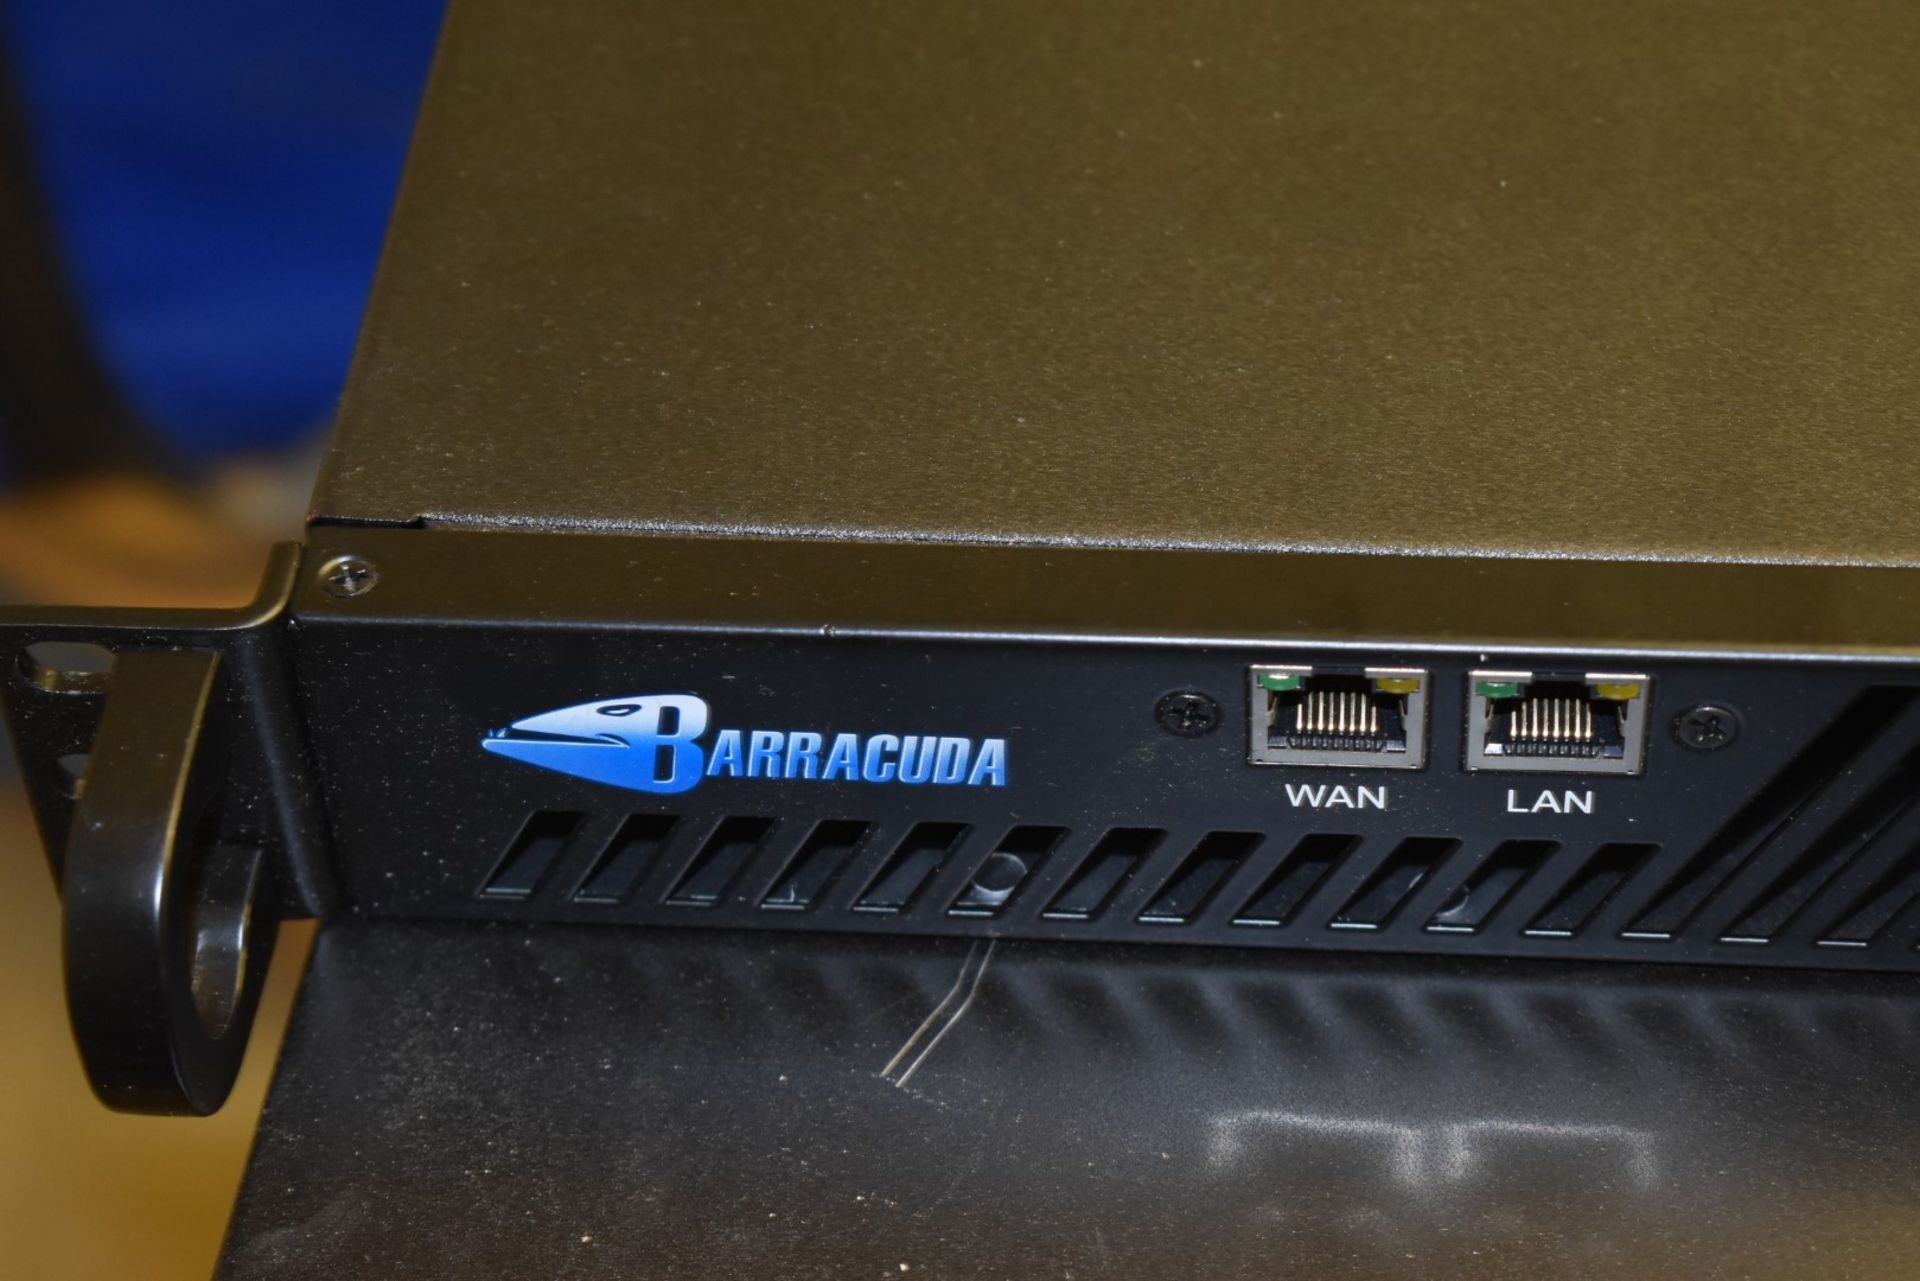 1 x Barracuda Web Filter 410 Firewall Appliance With Rackmount Fixtures - Ref VM262 IT - CL409 - - Image 3 of 3